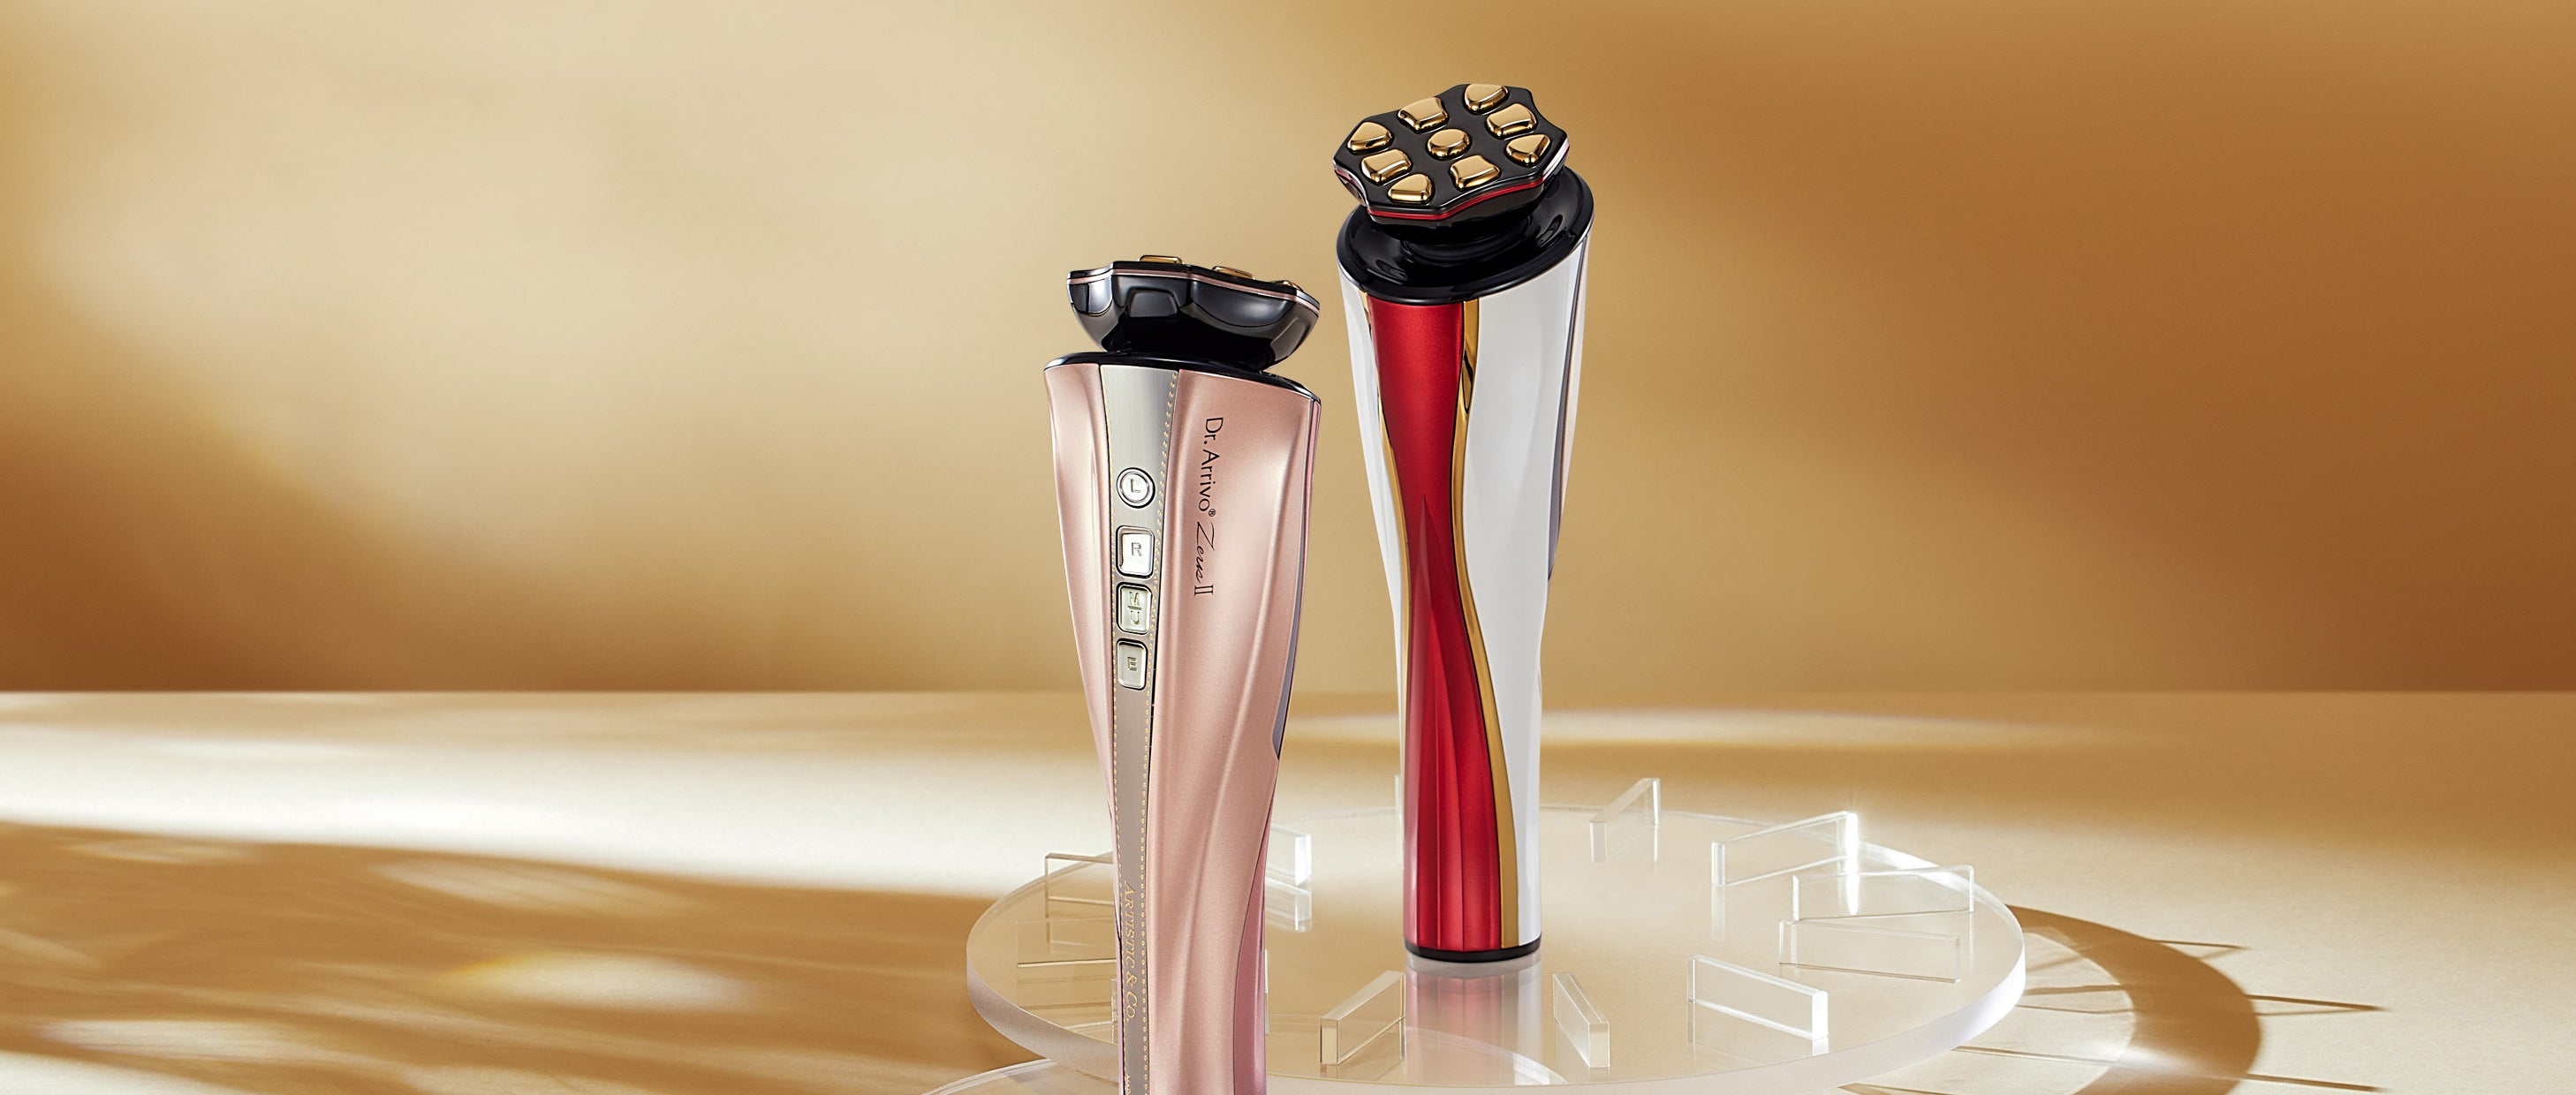 ARTISTIC & CO - Dr. Arrivo Beauty Devices | Oh Beauty